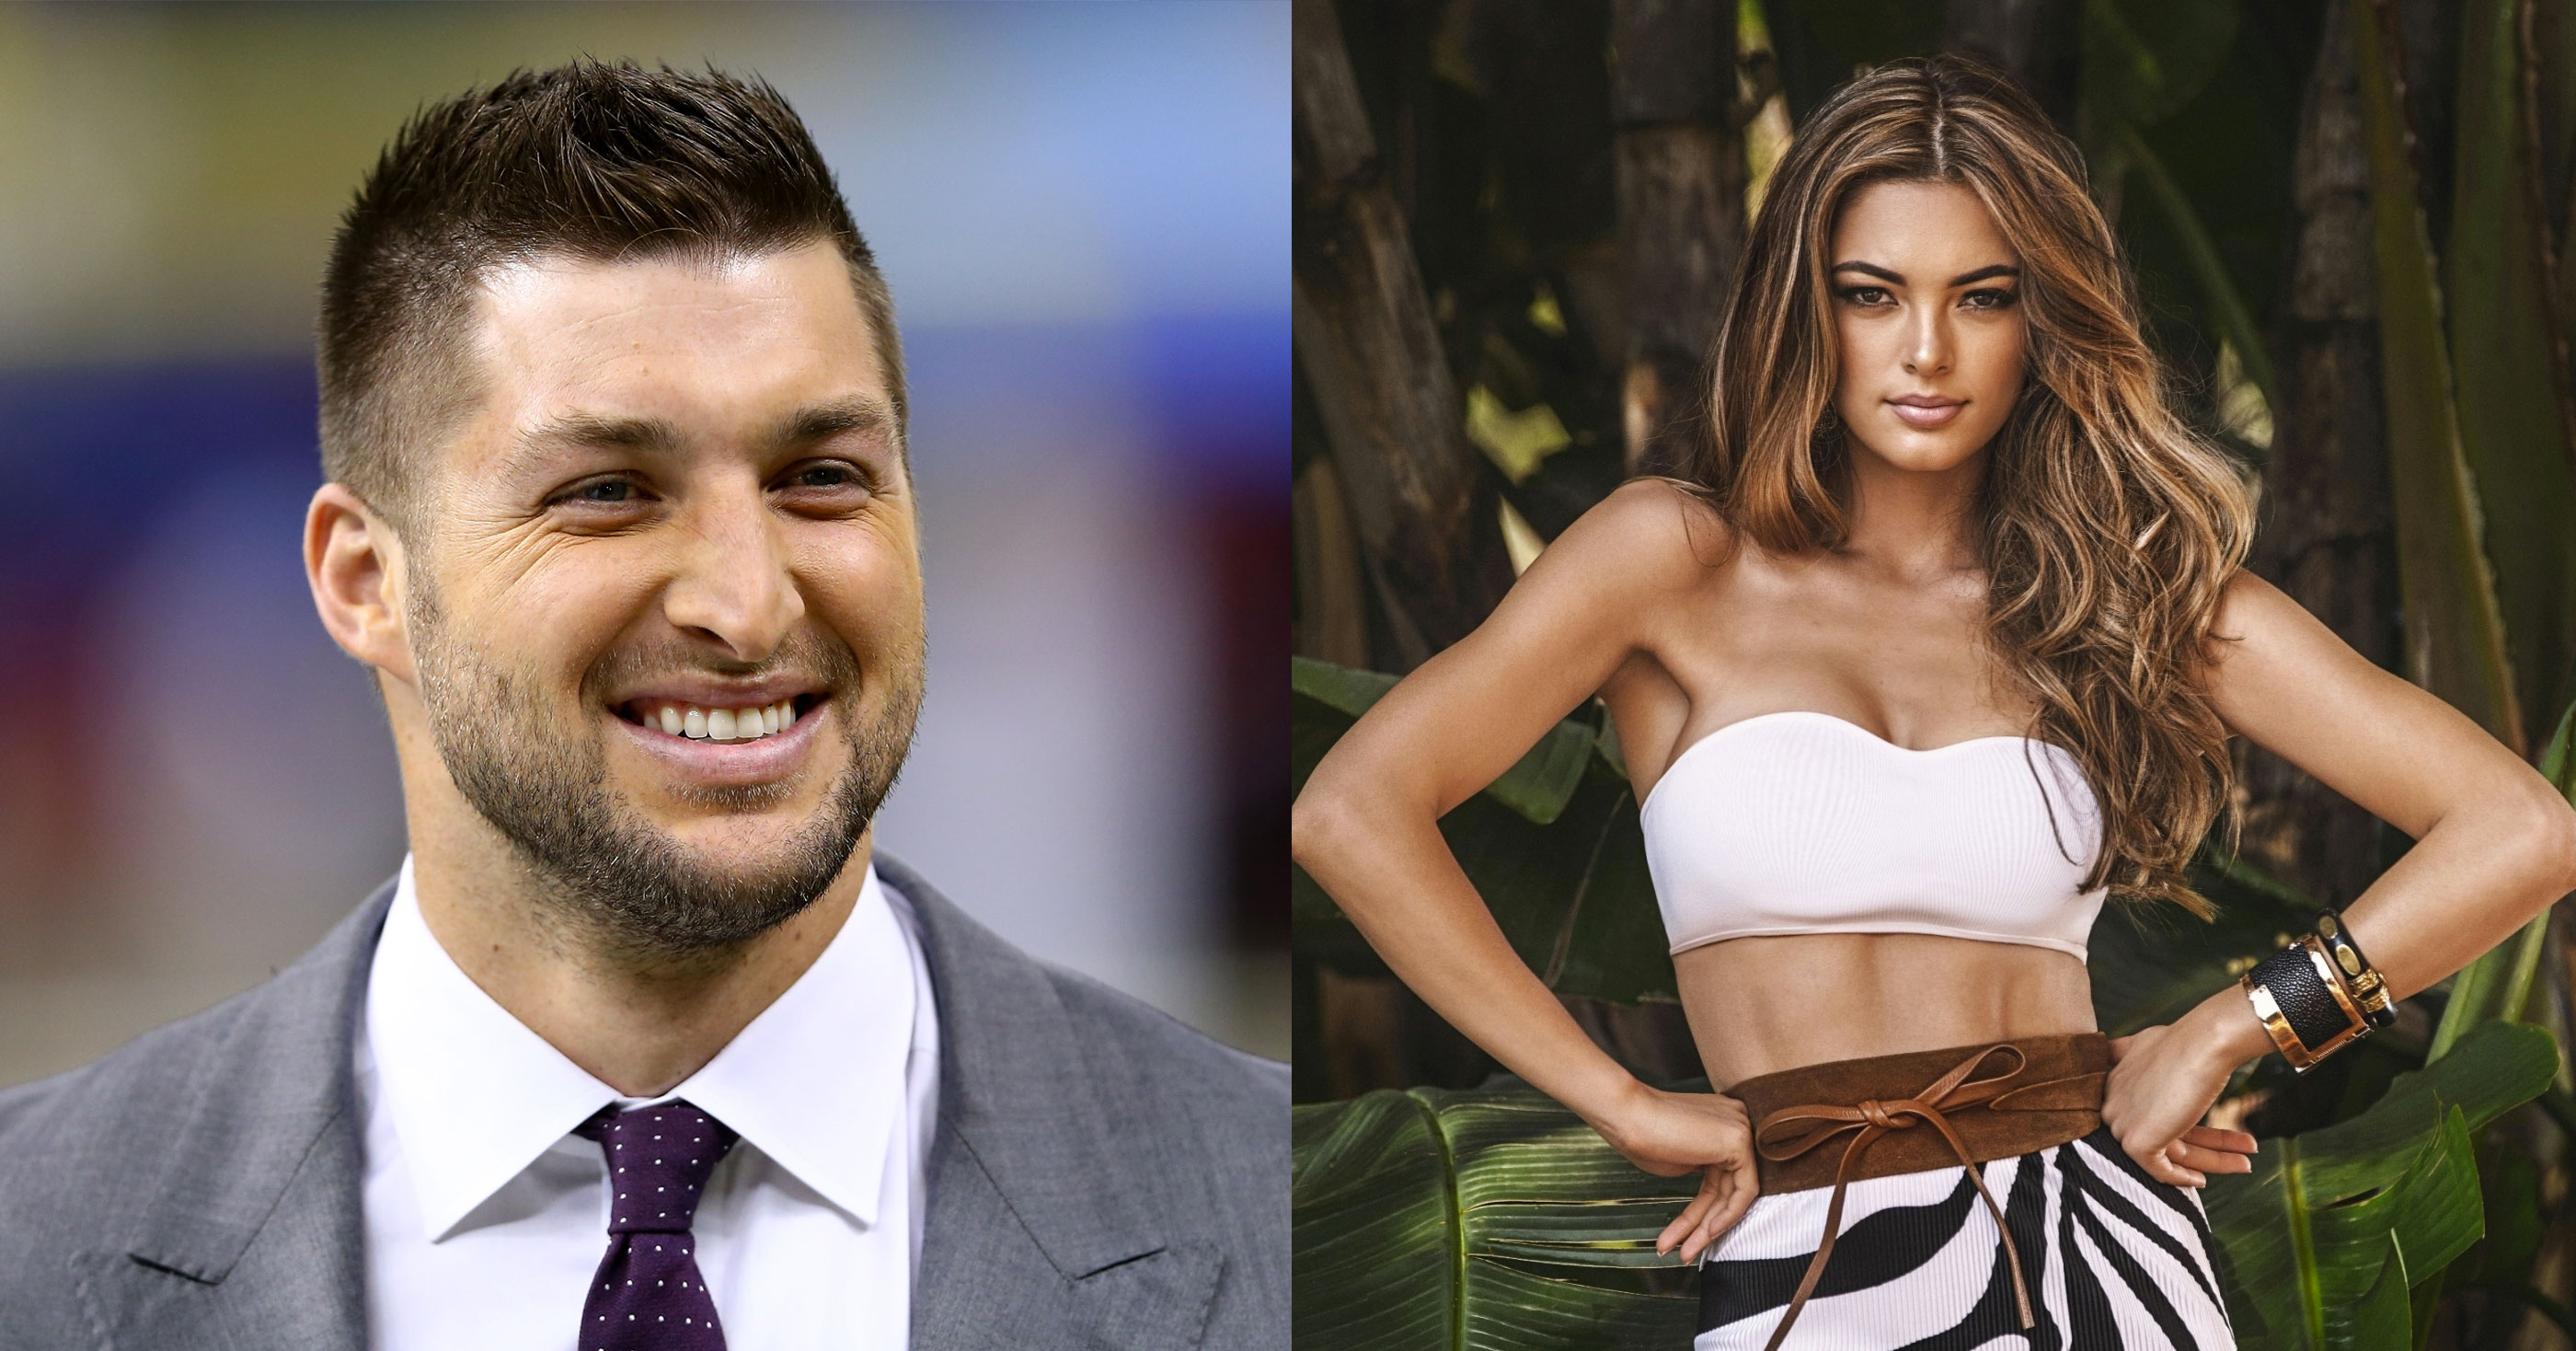 Tim Tebow Gets Engaged To Miss Universe Demi-Leigh Nel-Peters (PICS)2800 x 1468